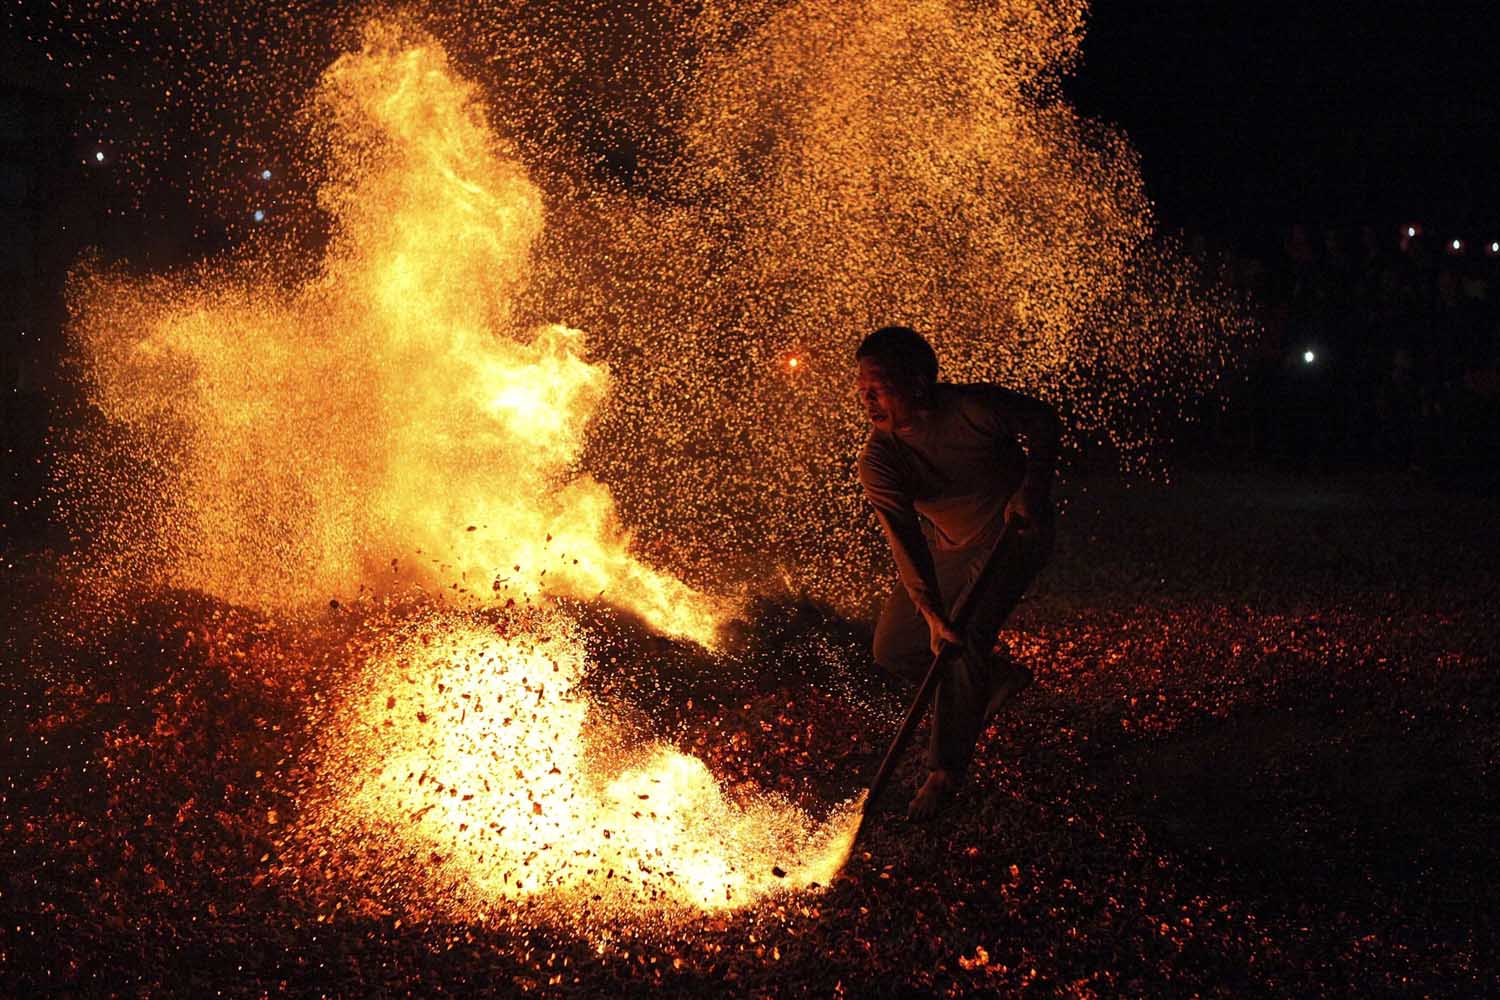 A man sweeps the burning charcoal as he participates in the traditional ritual called "Lianhuo", or "fire walking", in Pan'an county